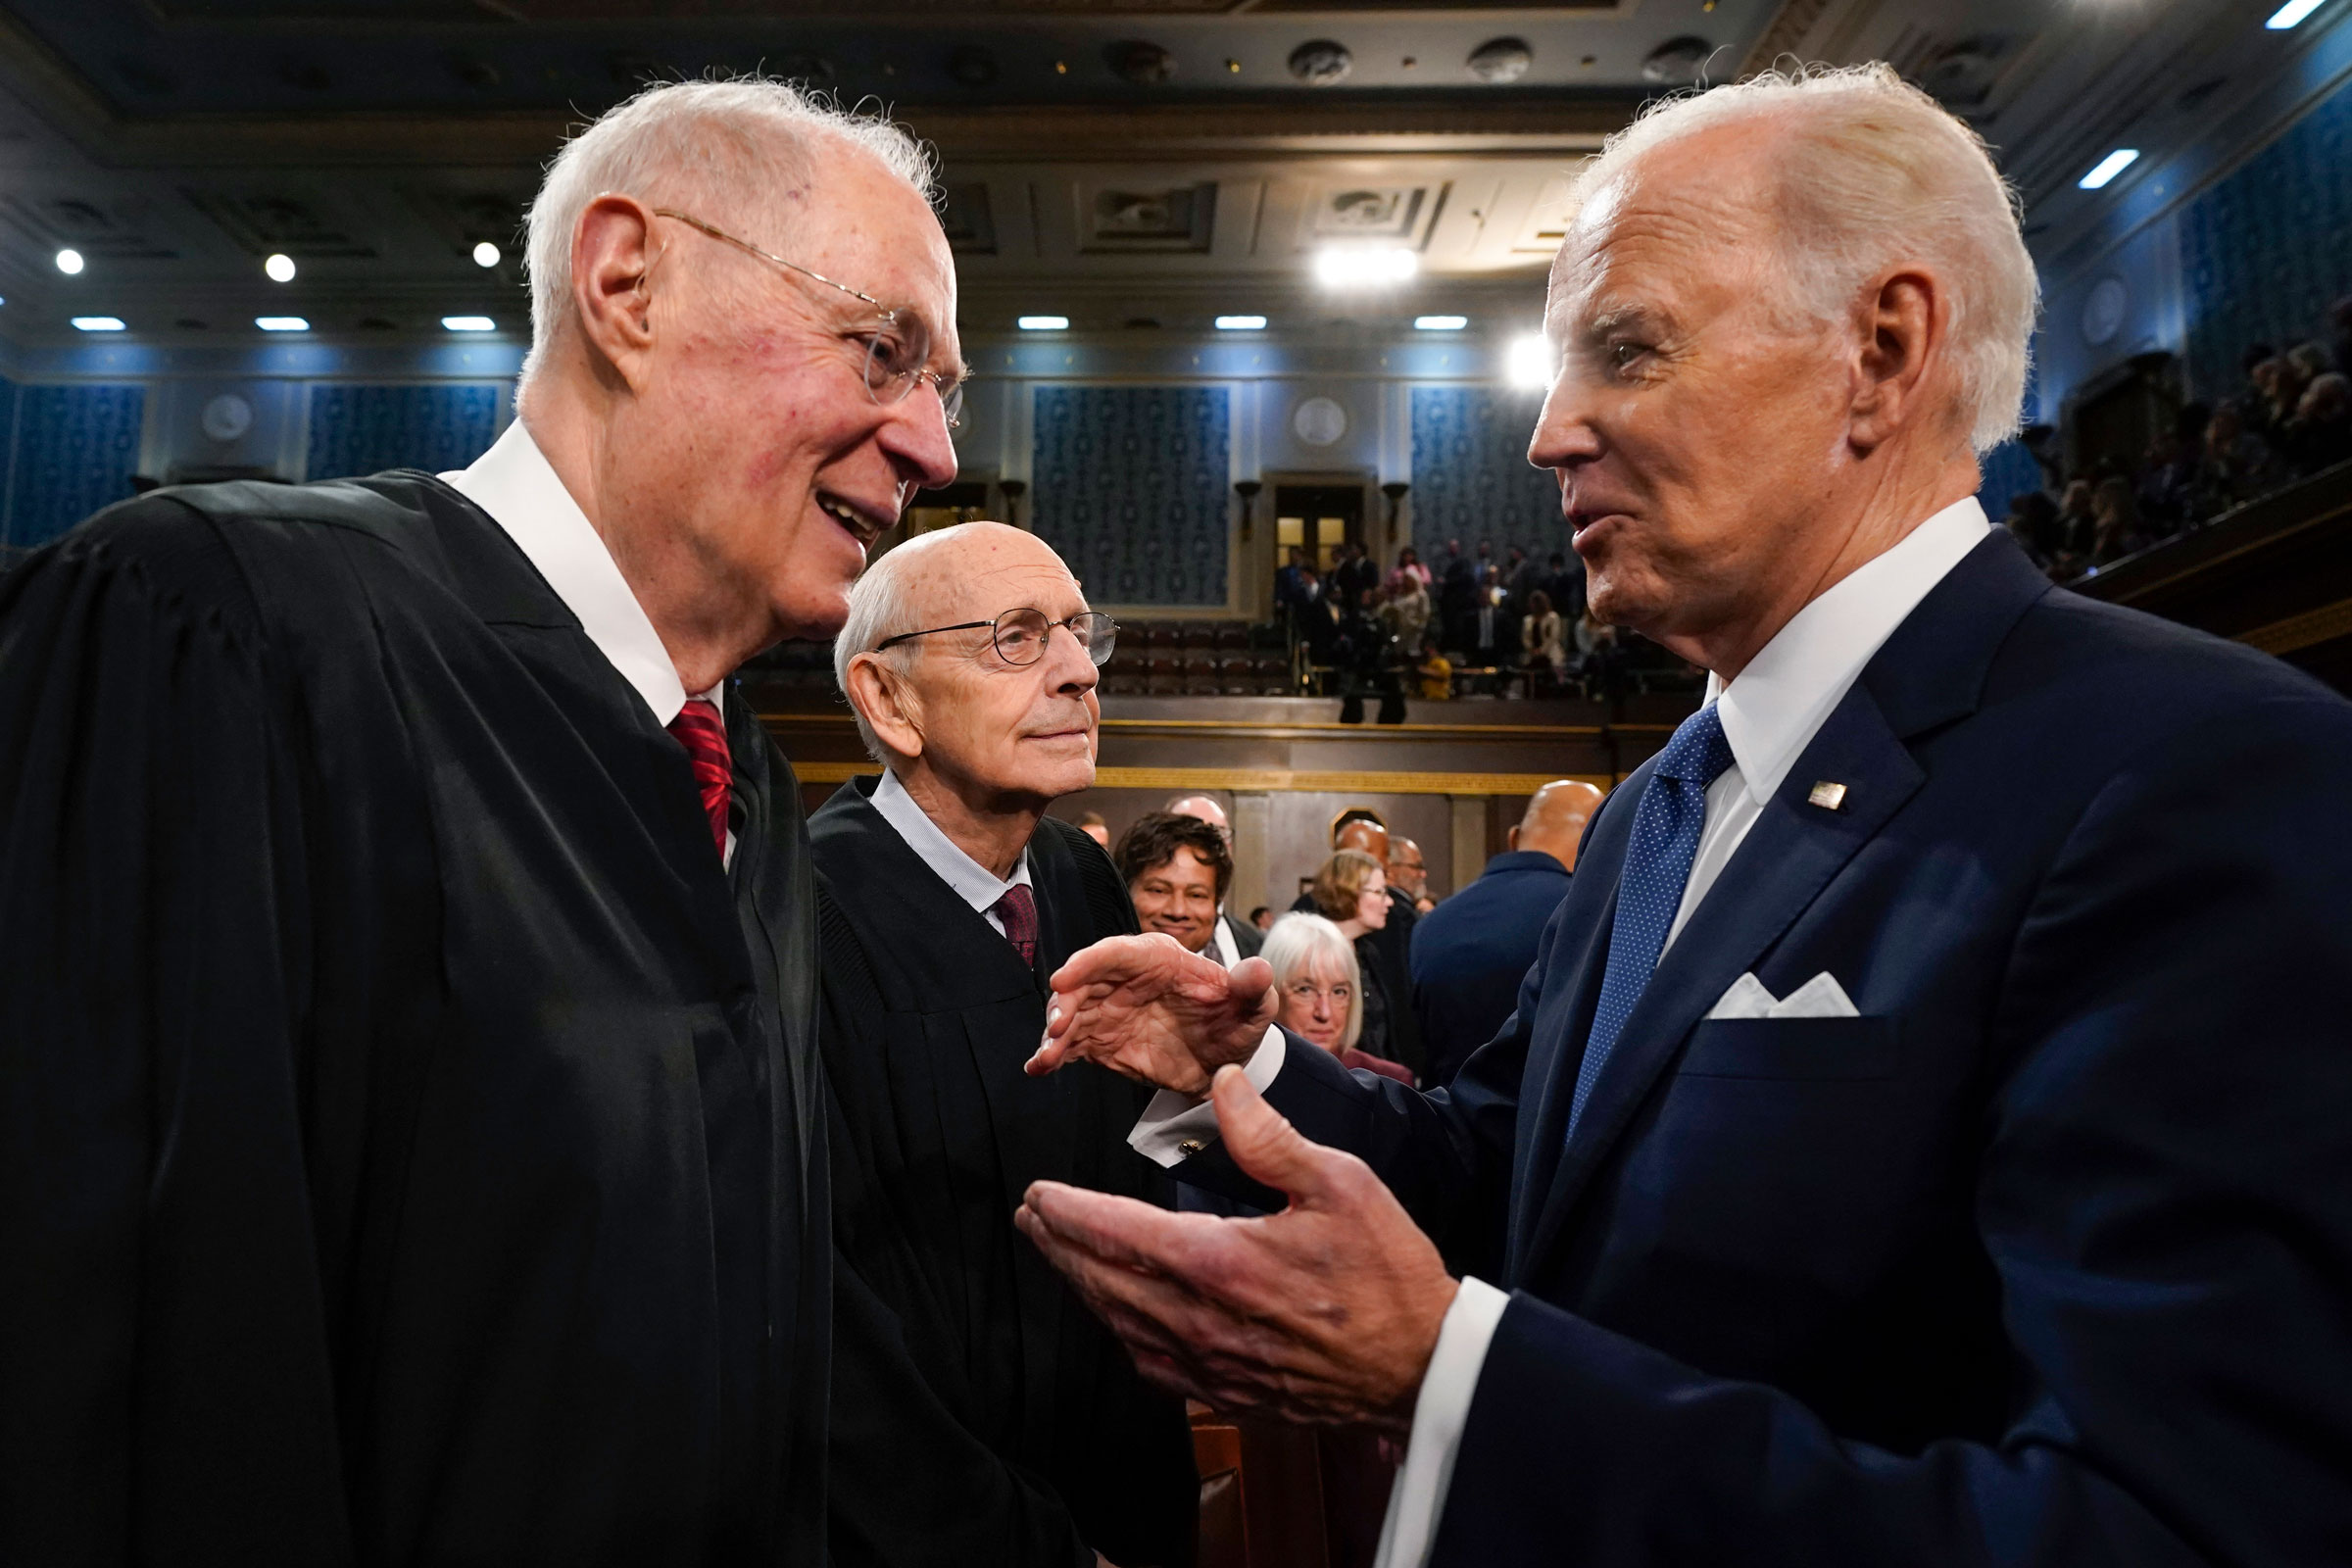 President Joe Biden talks with retired Supreme Court Justice Anthony Kennedy after delivering the State of the Union address